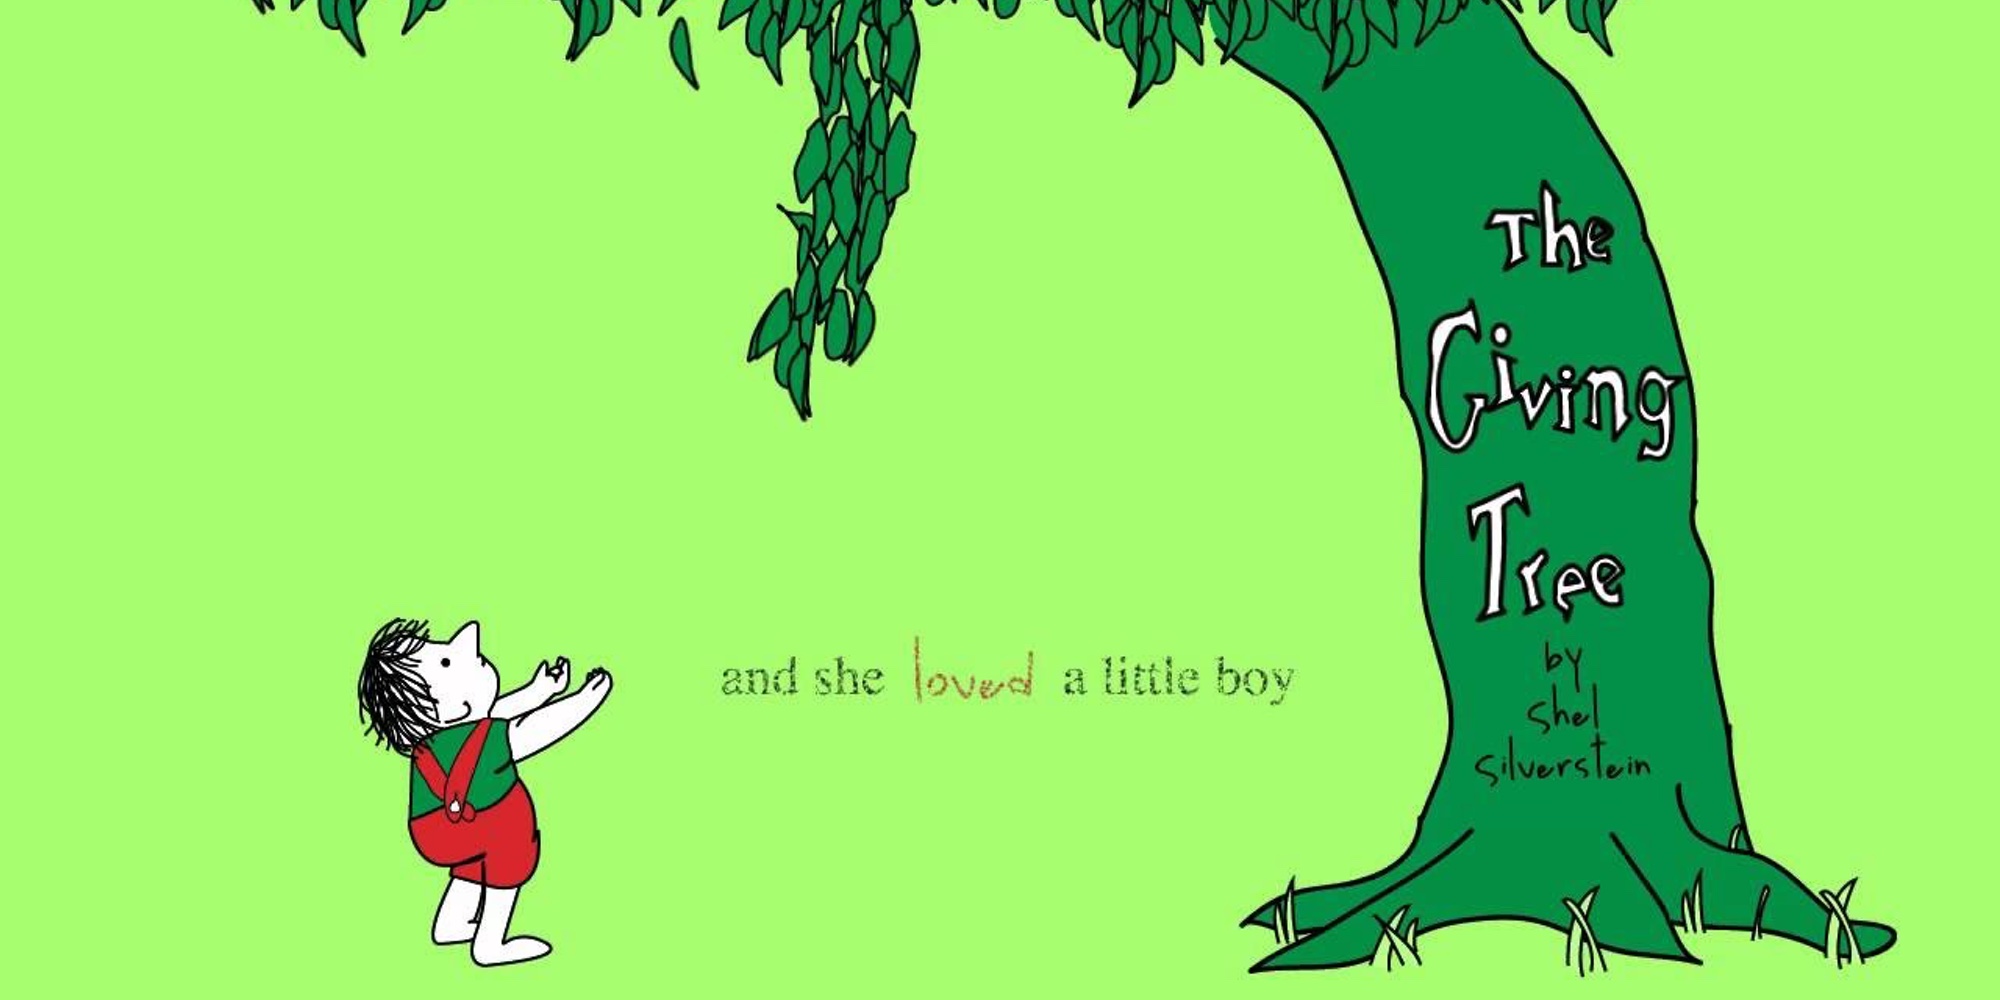 get-the-classic-children-s-book-the-giving-tree-hardcover-for-6